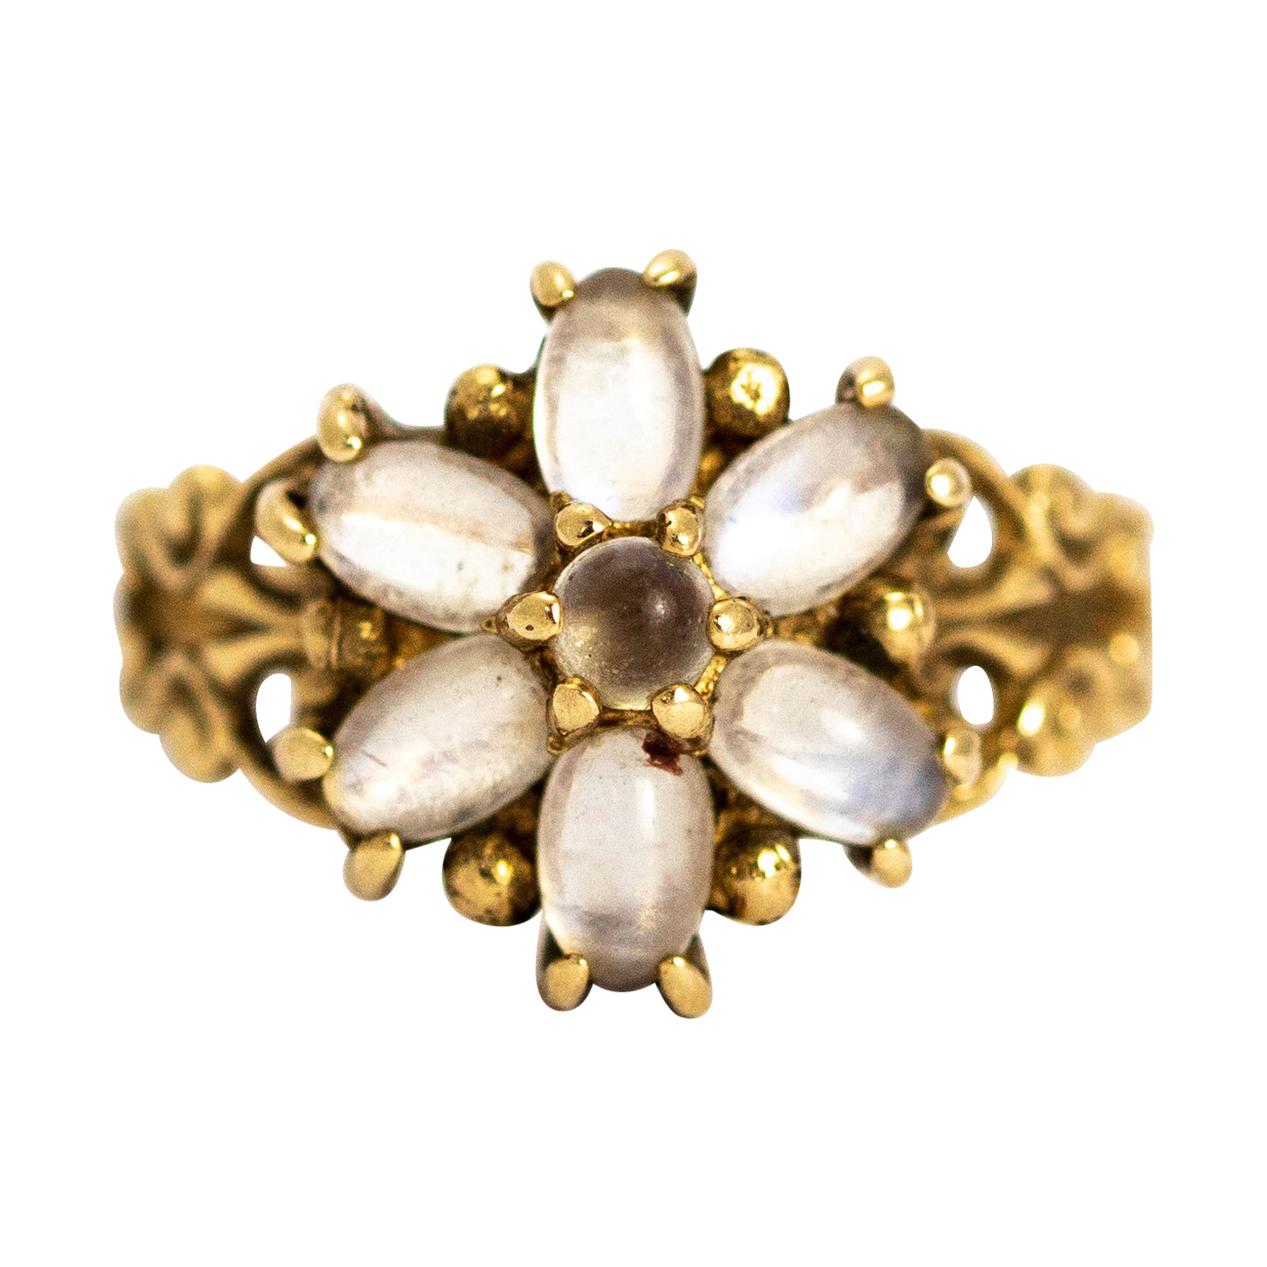 Vintage Moonstone and 9 Carat Gold Ring